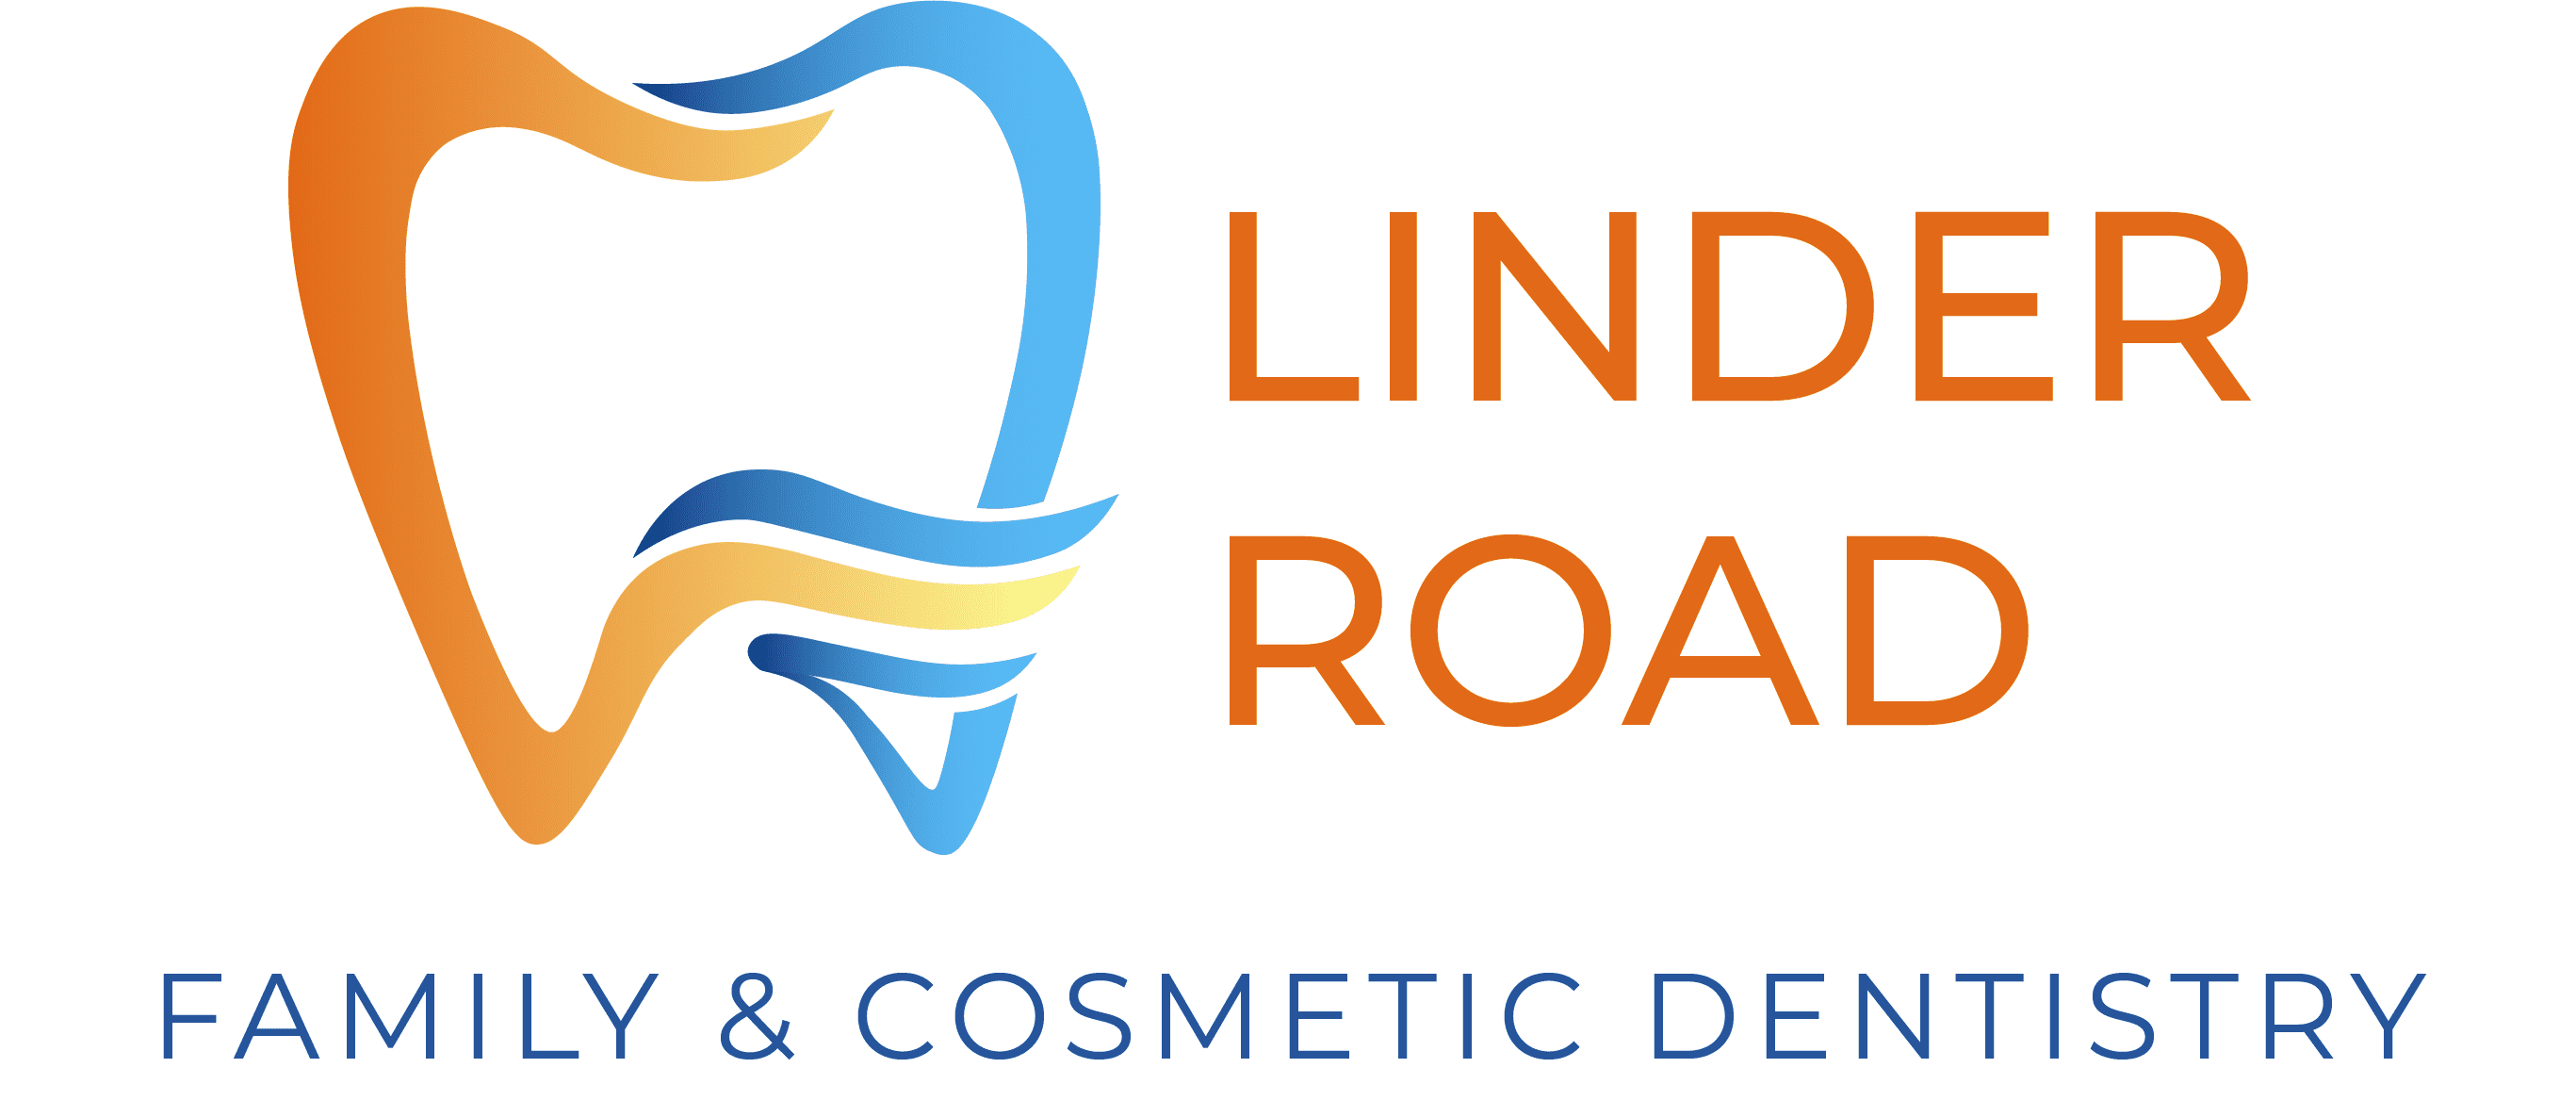 Linder Road Family & Cosmetic Dentistry logo